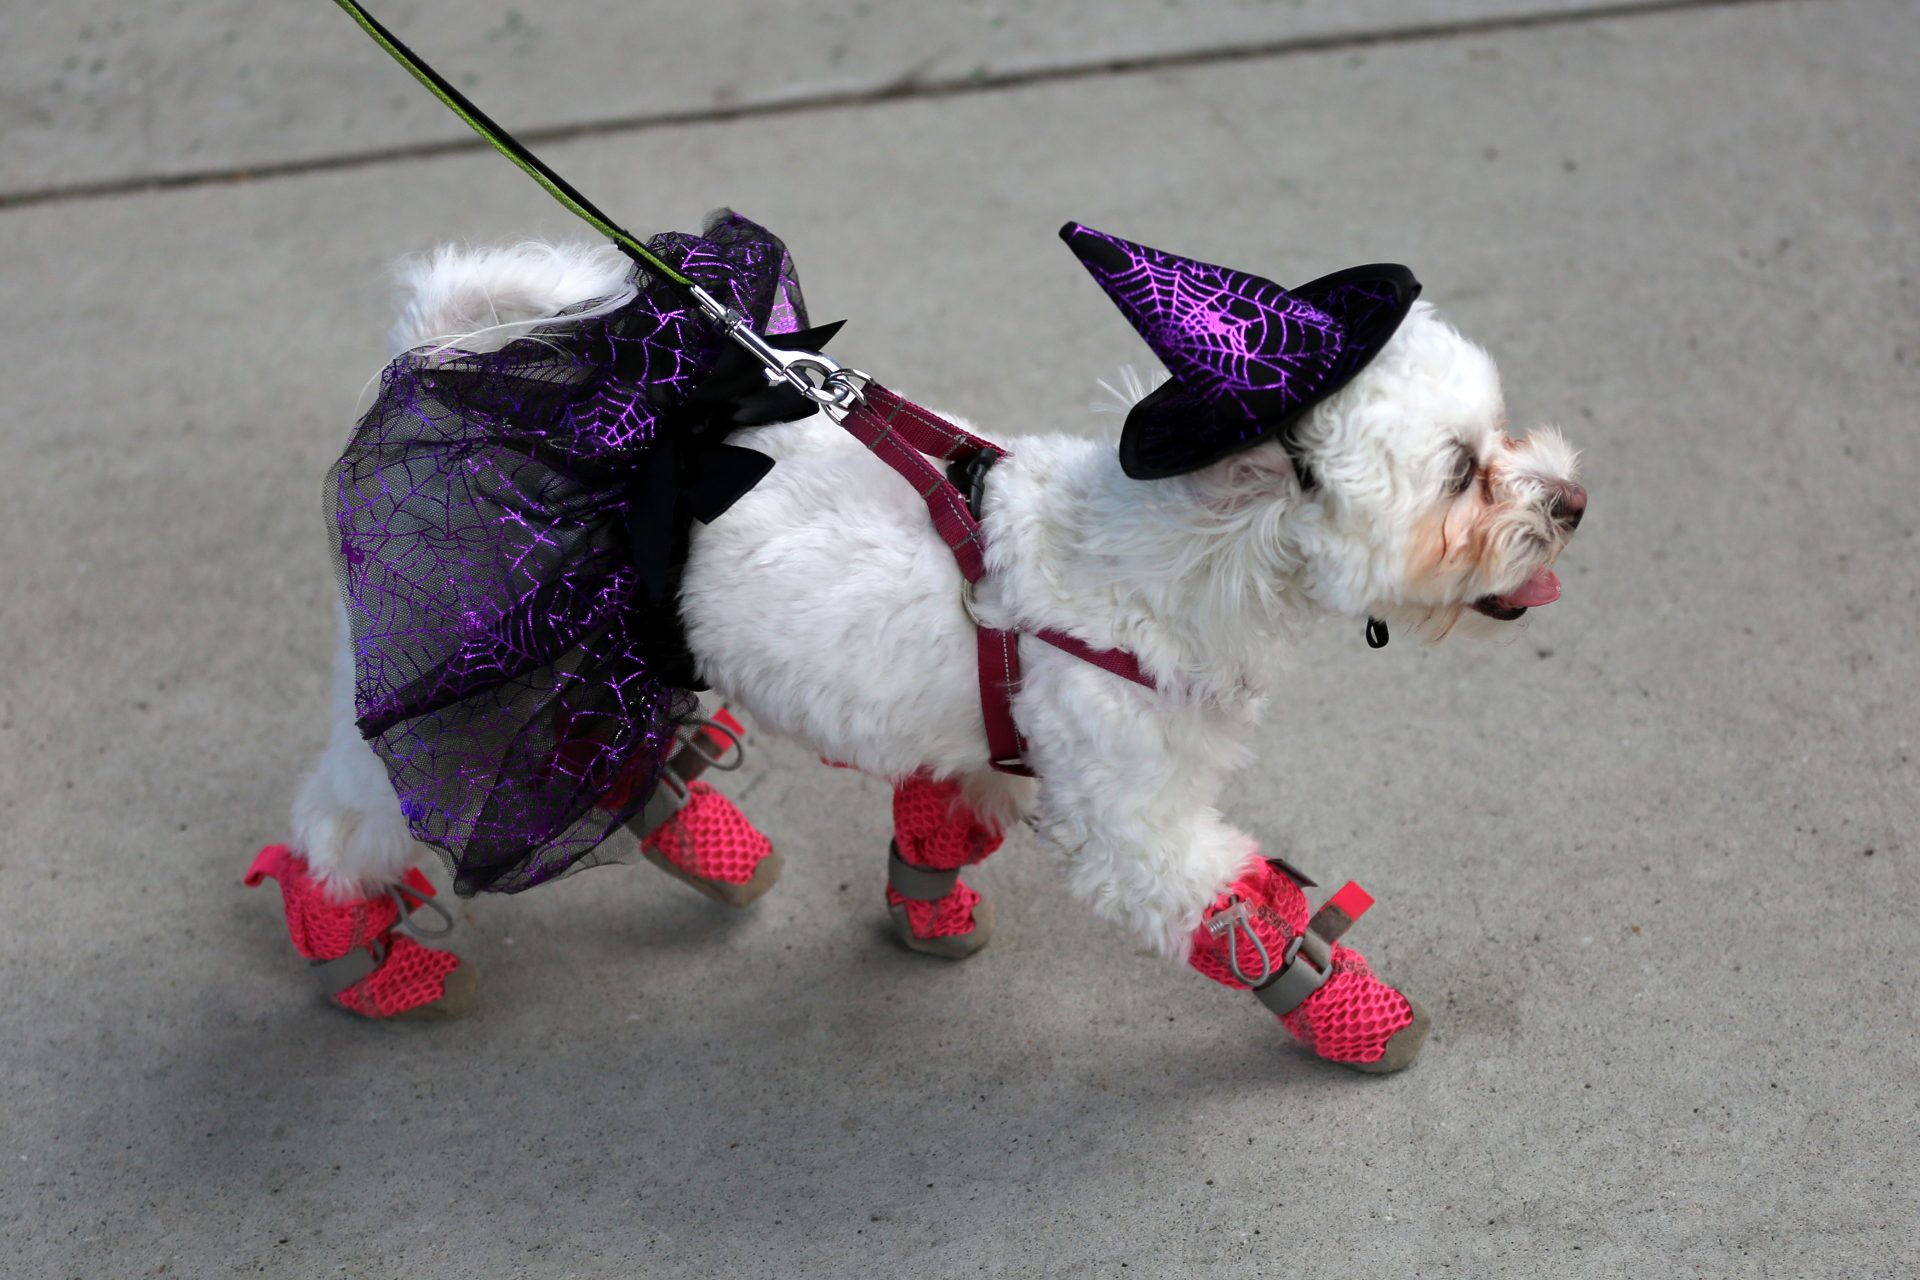 Help wanted: coquette canine looking for her broom